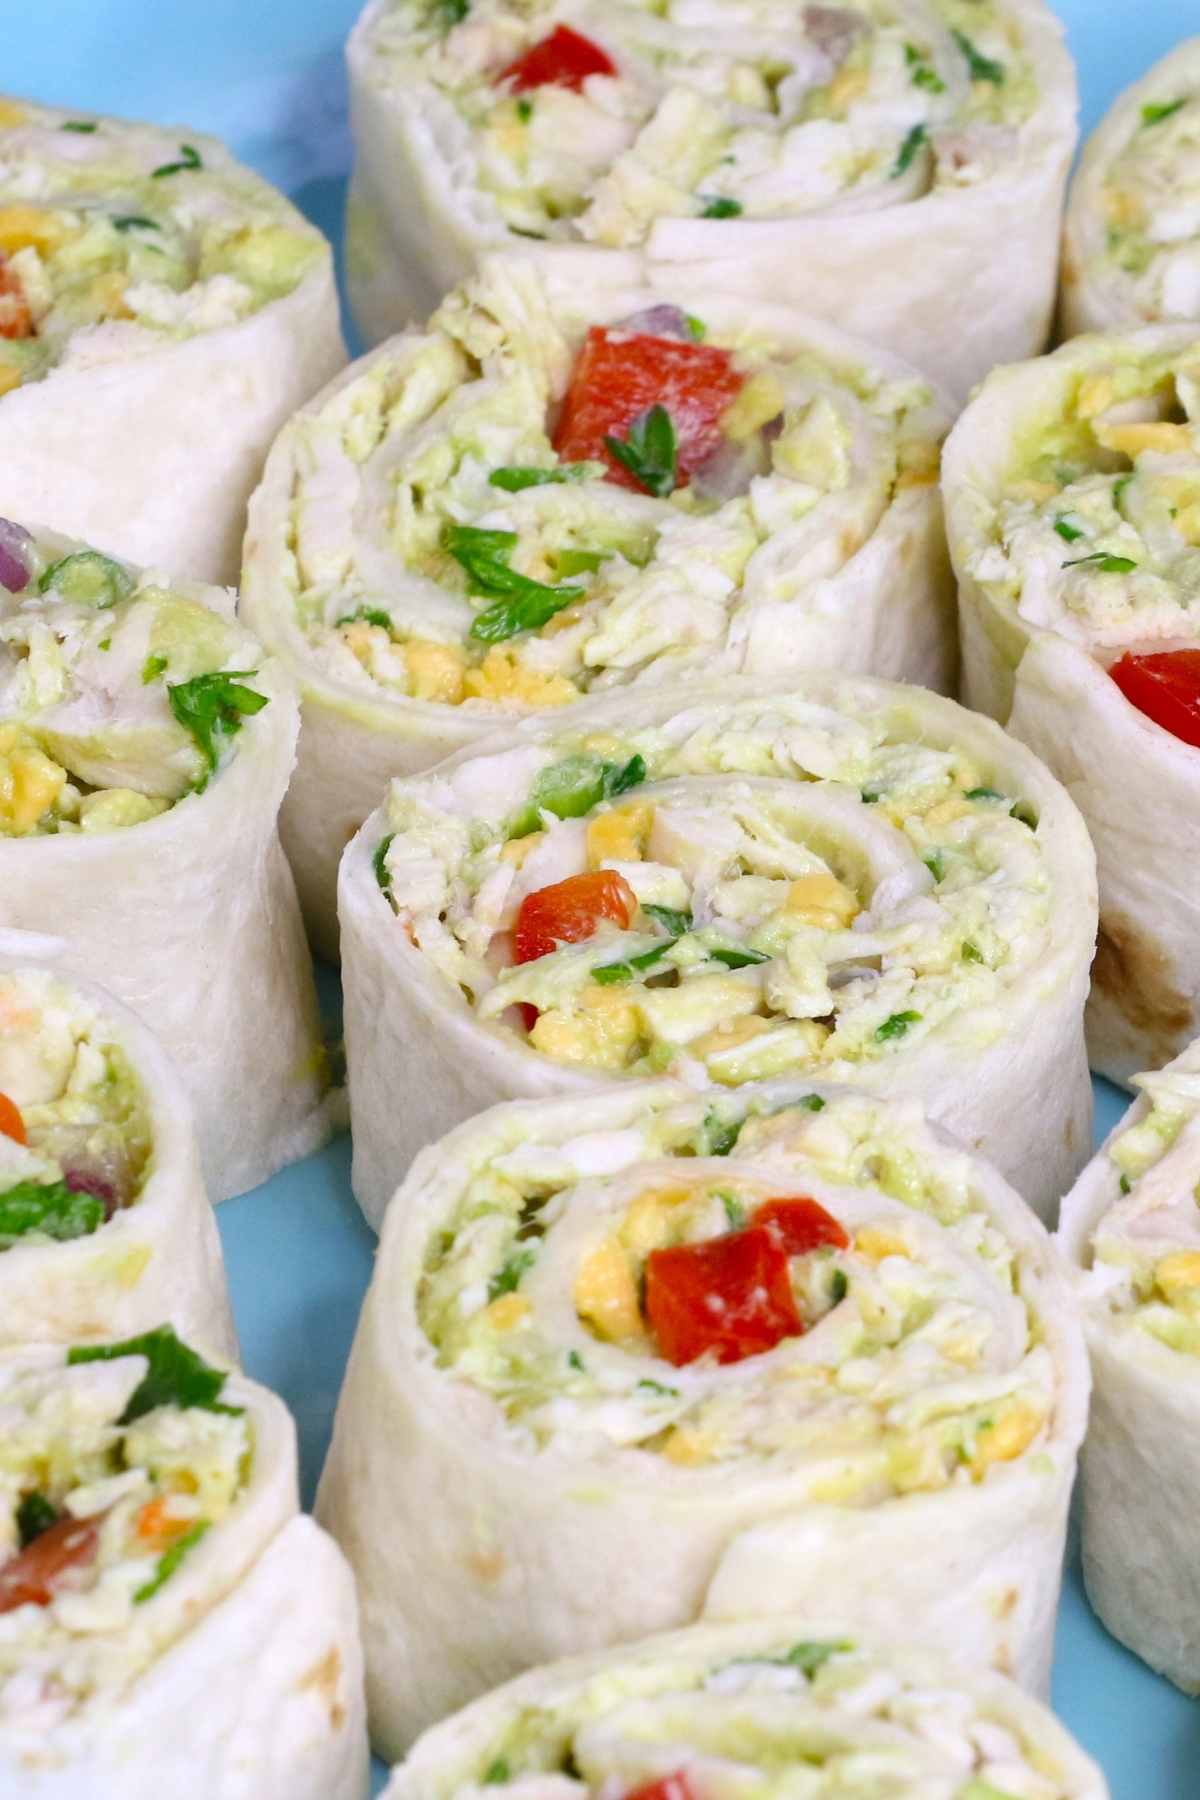 Cream cheese tortilla roll ups are an easy and convenient solution for parties, lunches, and snacks! They’re super easy to make and can be customized to suit your taste.